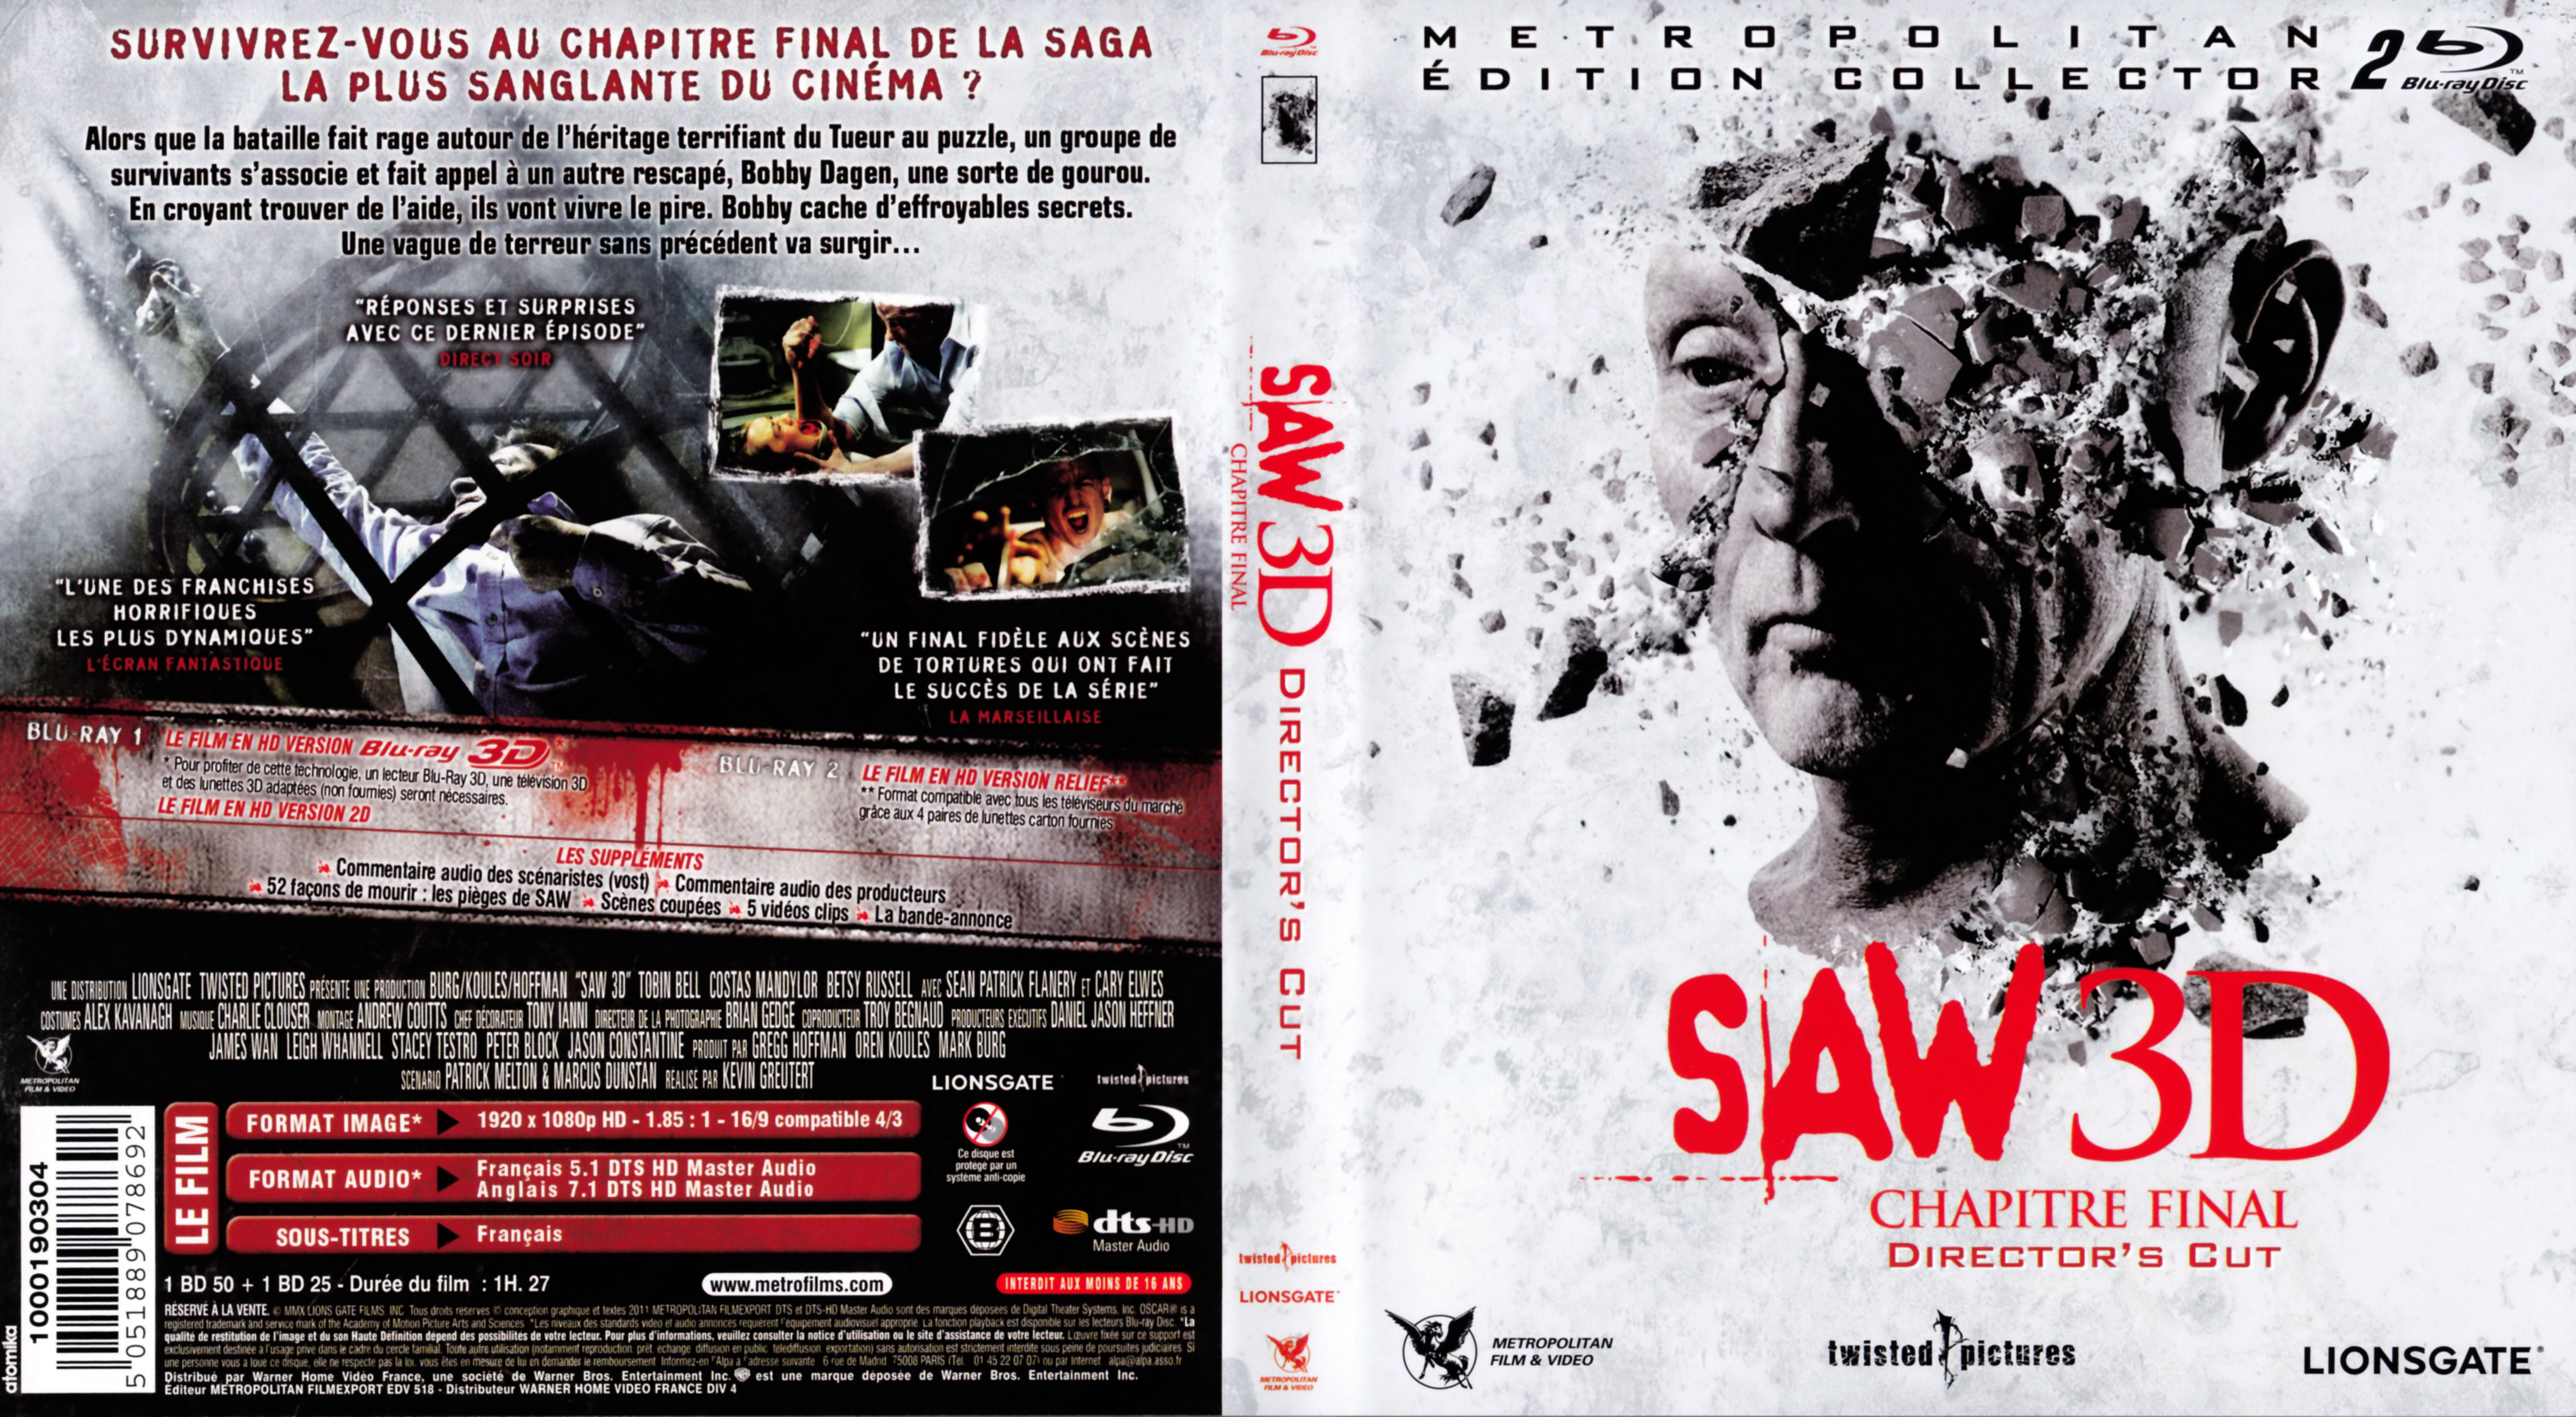 Jaquette DVD Saw 3d (BLU-RAY)